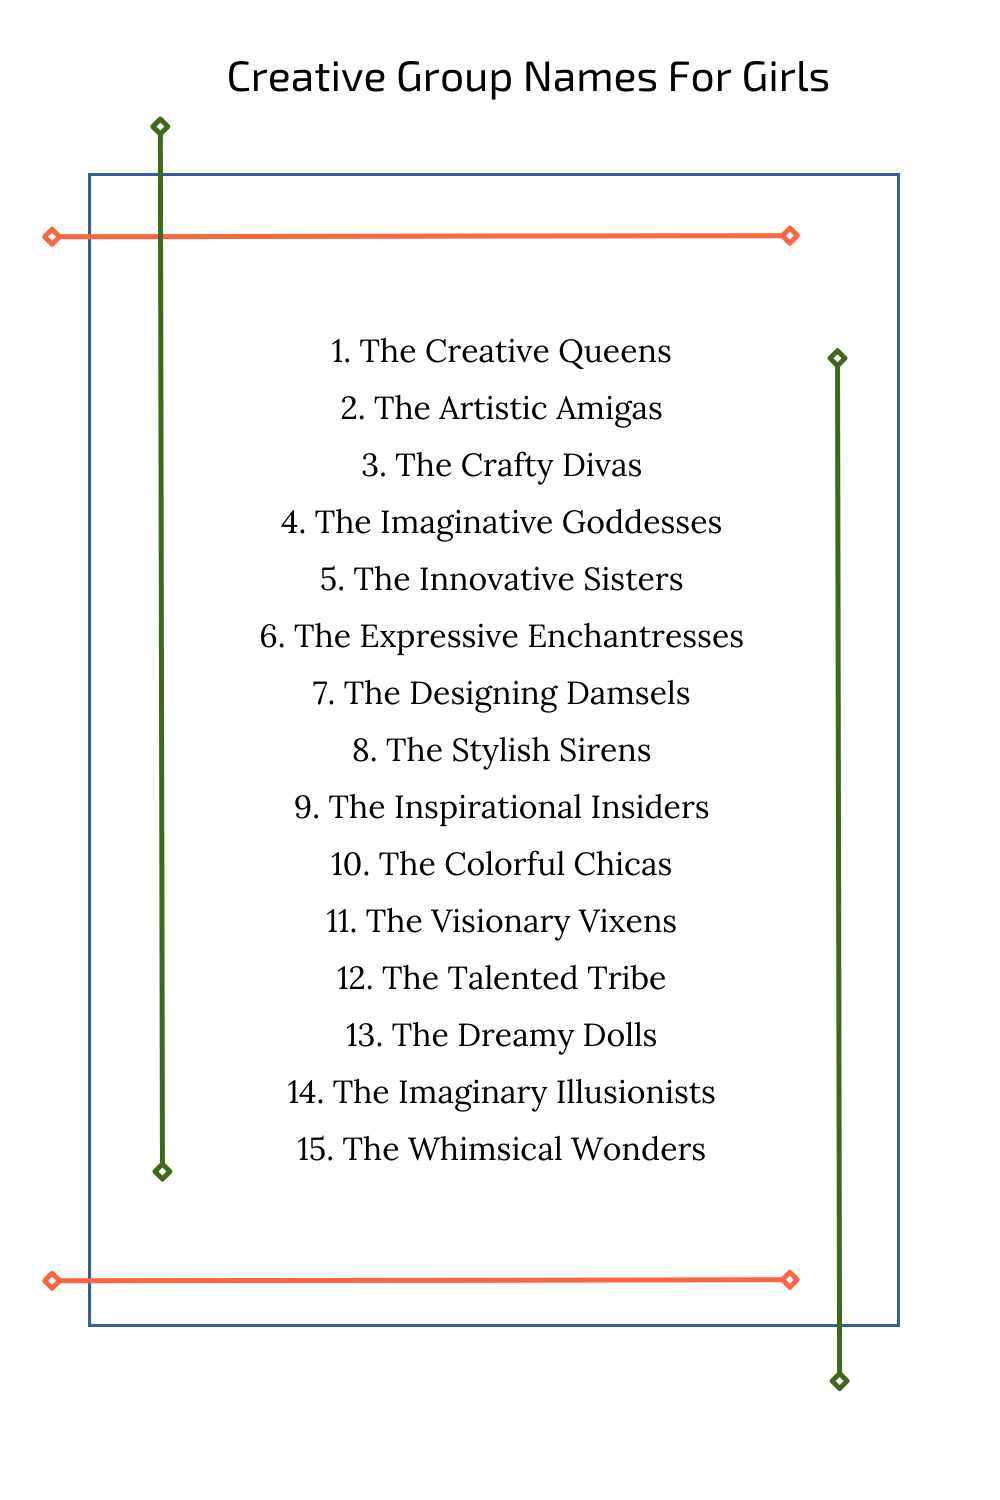 Creative Group Names For Girls